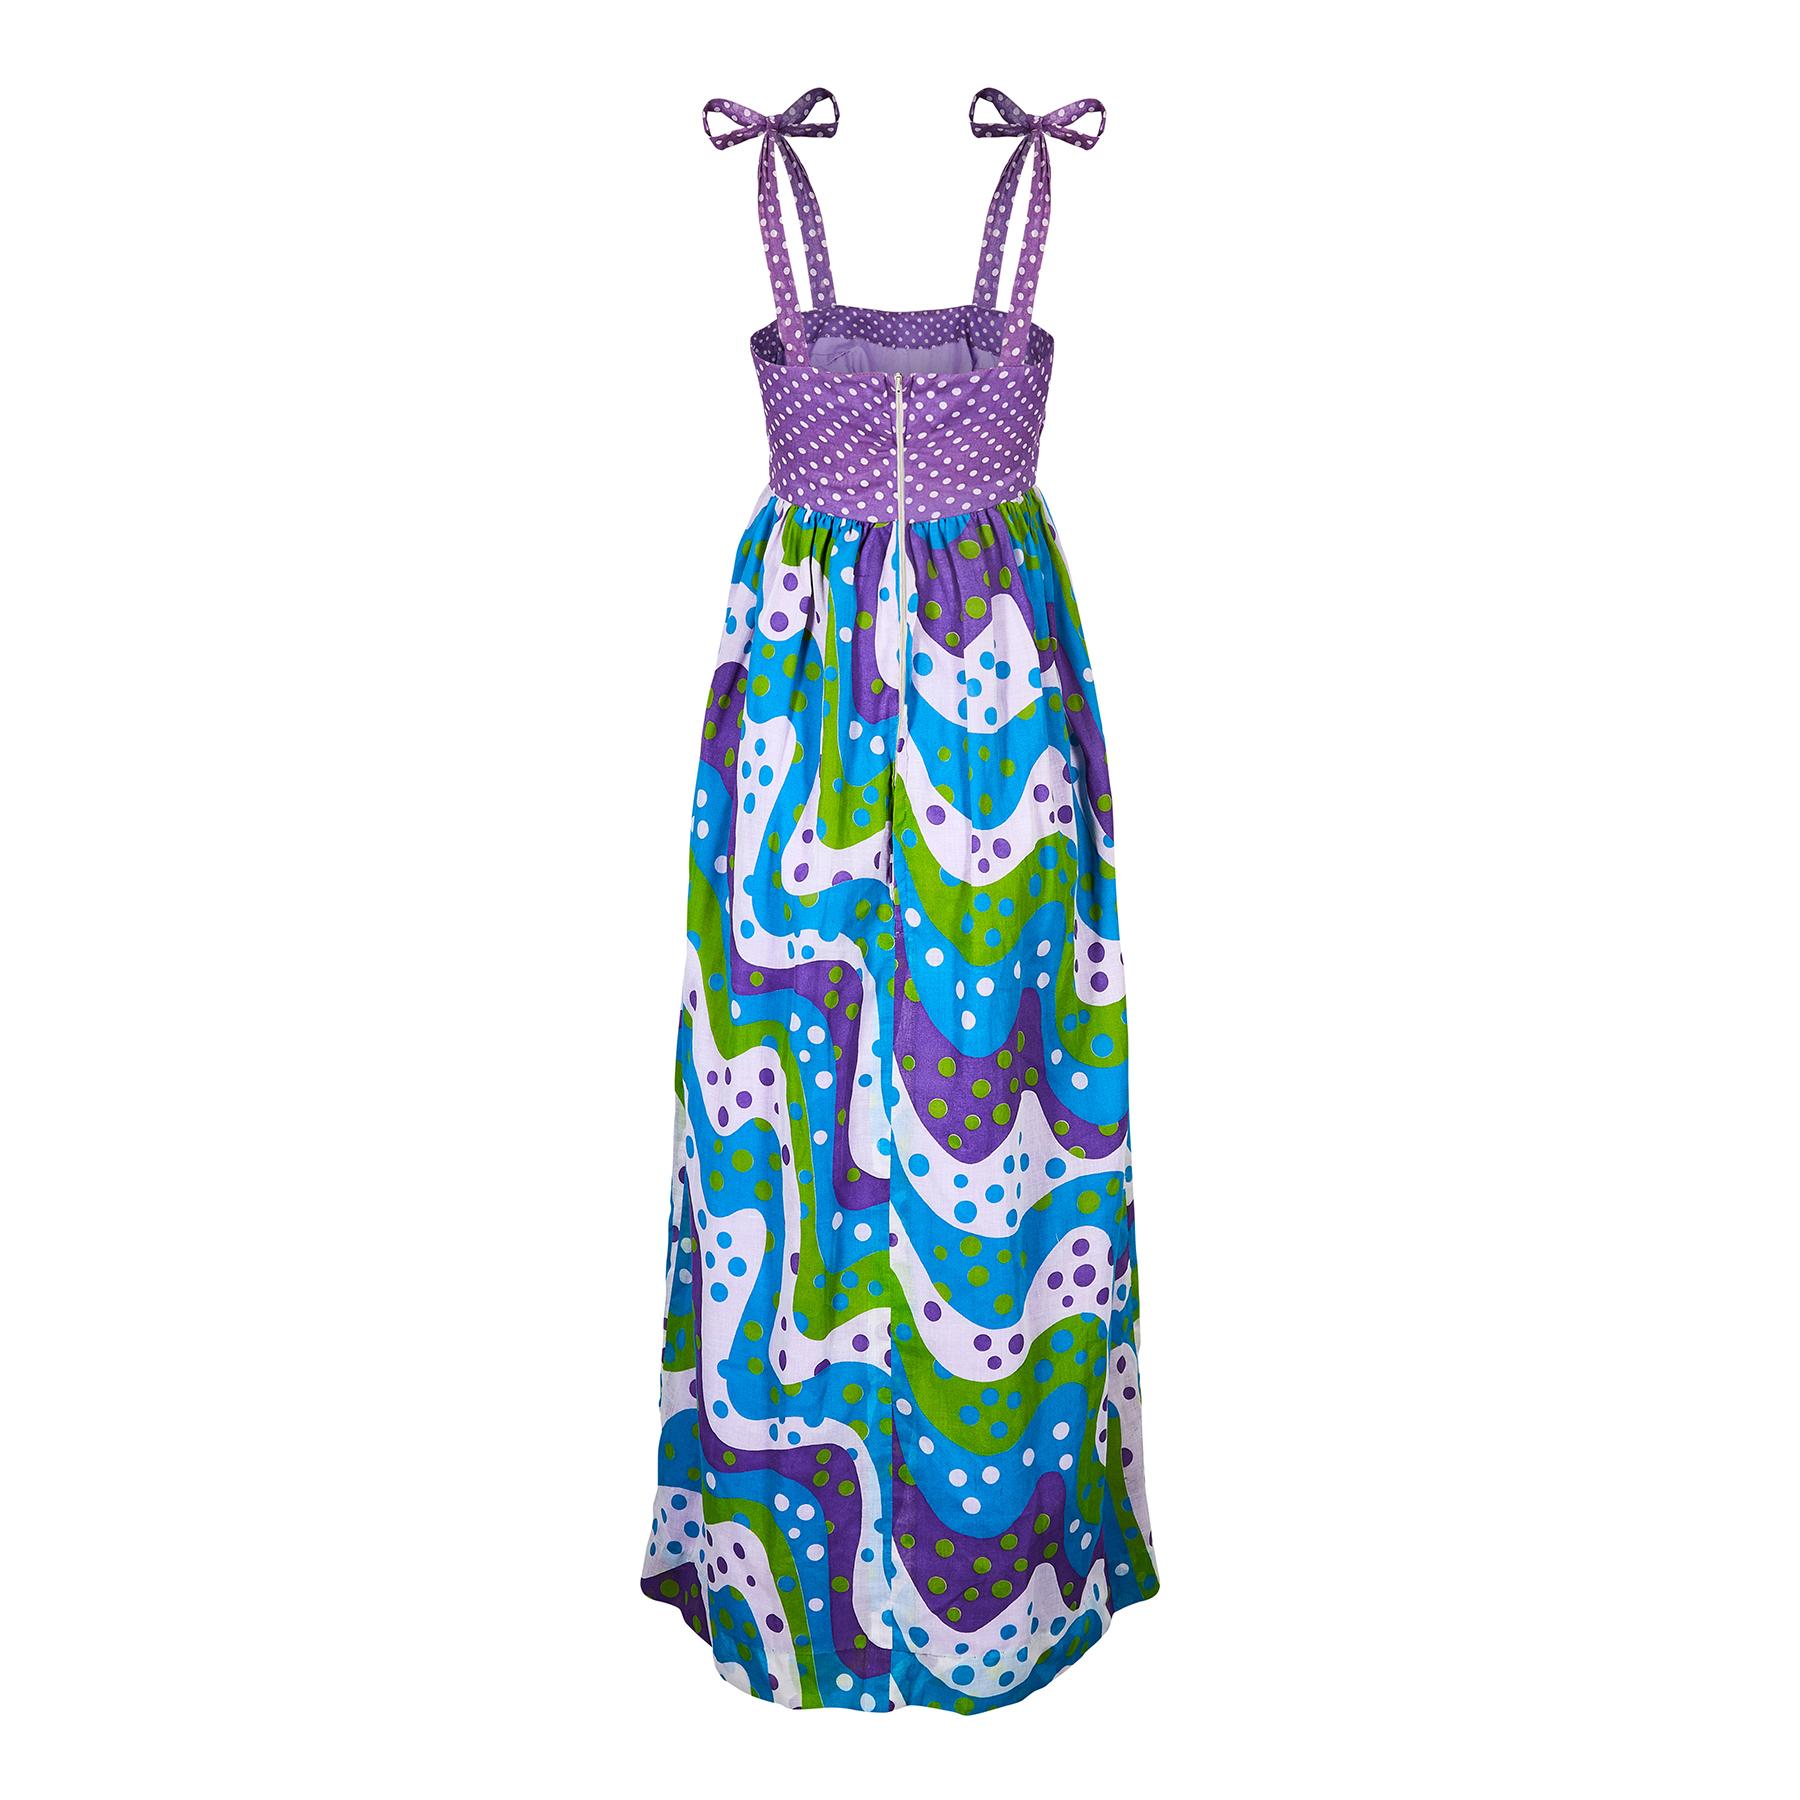 This cool and original 1970s maxi dress combines two types of polka dot fabric in a bold format. The colour palette is a grassy green, teal, purple and white. The fabric is a starched lightweight muslin cotton with a very substantial quality brushed